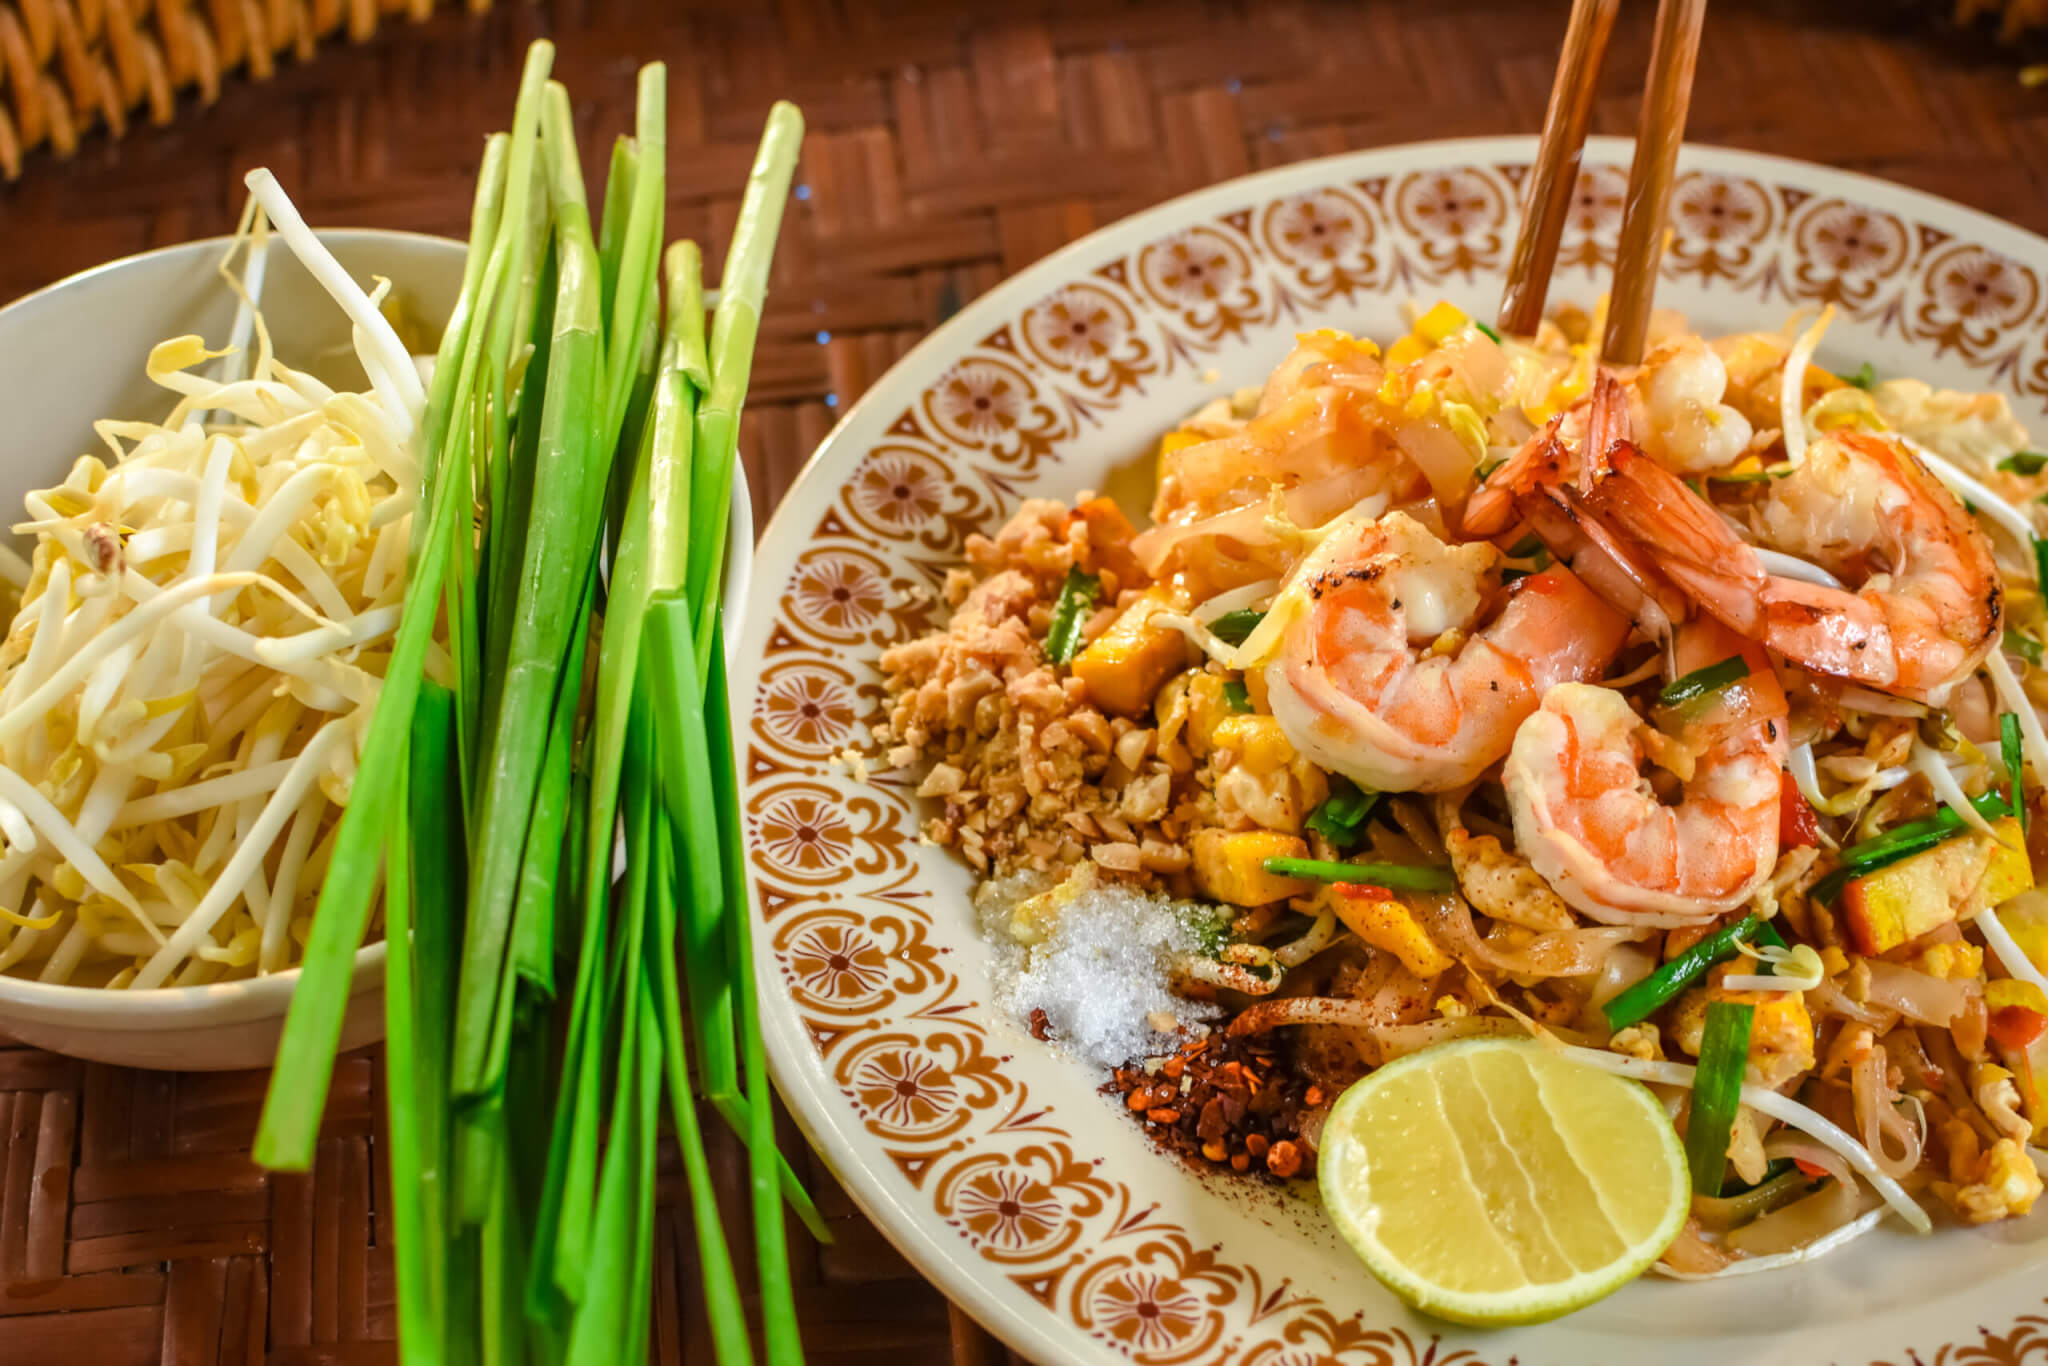 Thai Stir-fried rice noodles (Pad Thai) with shrimp and vegetables. One of the most famous food in Thailand. Thailand traditional dish.